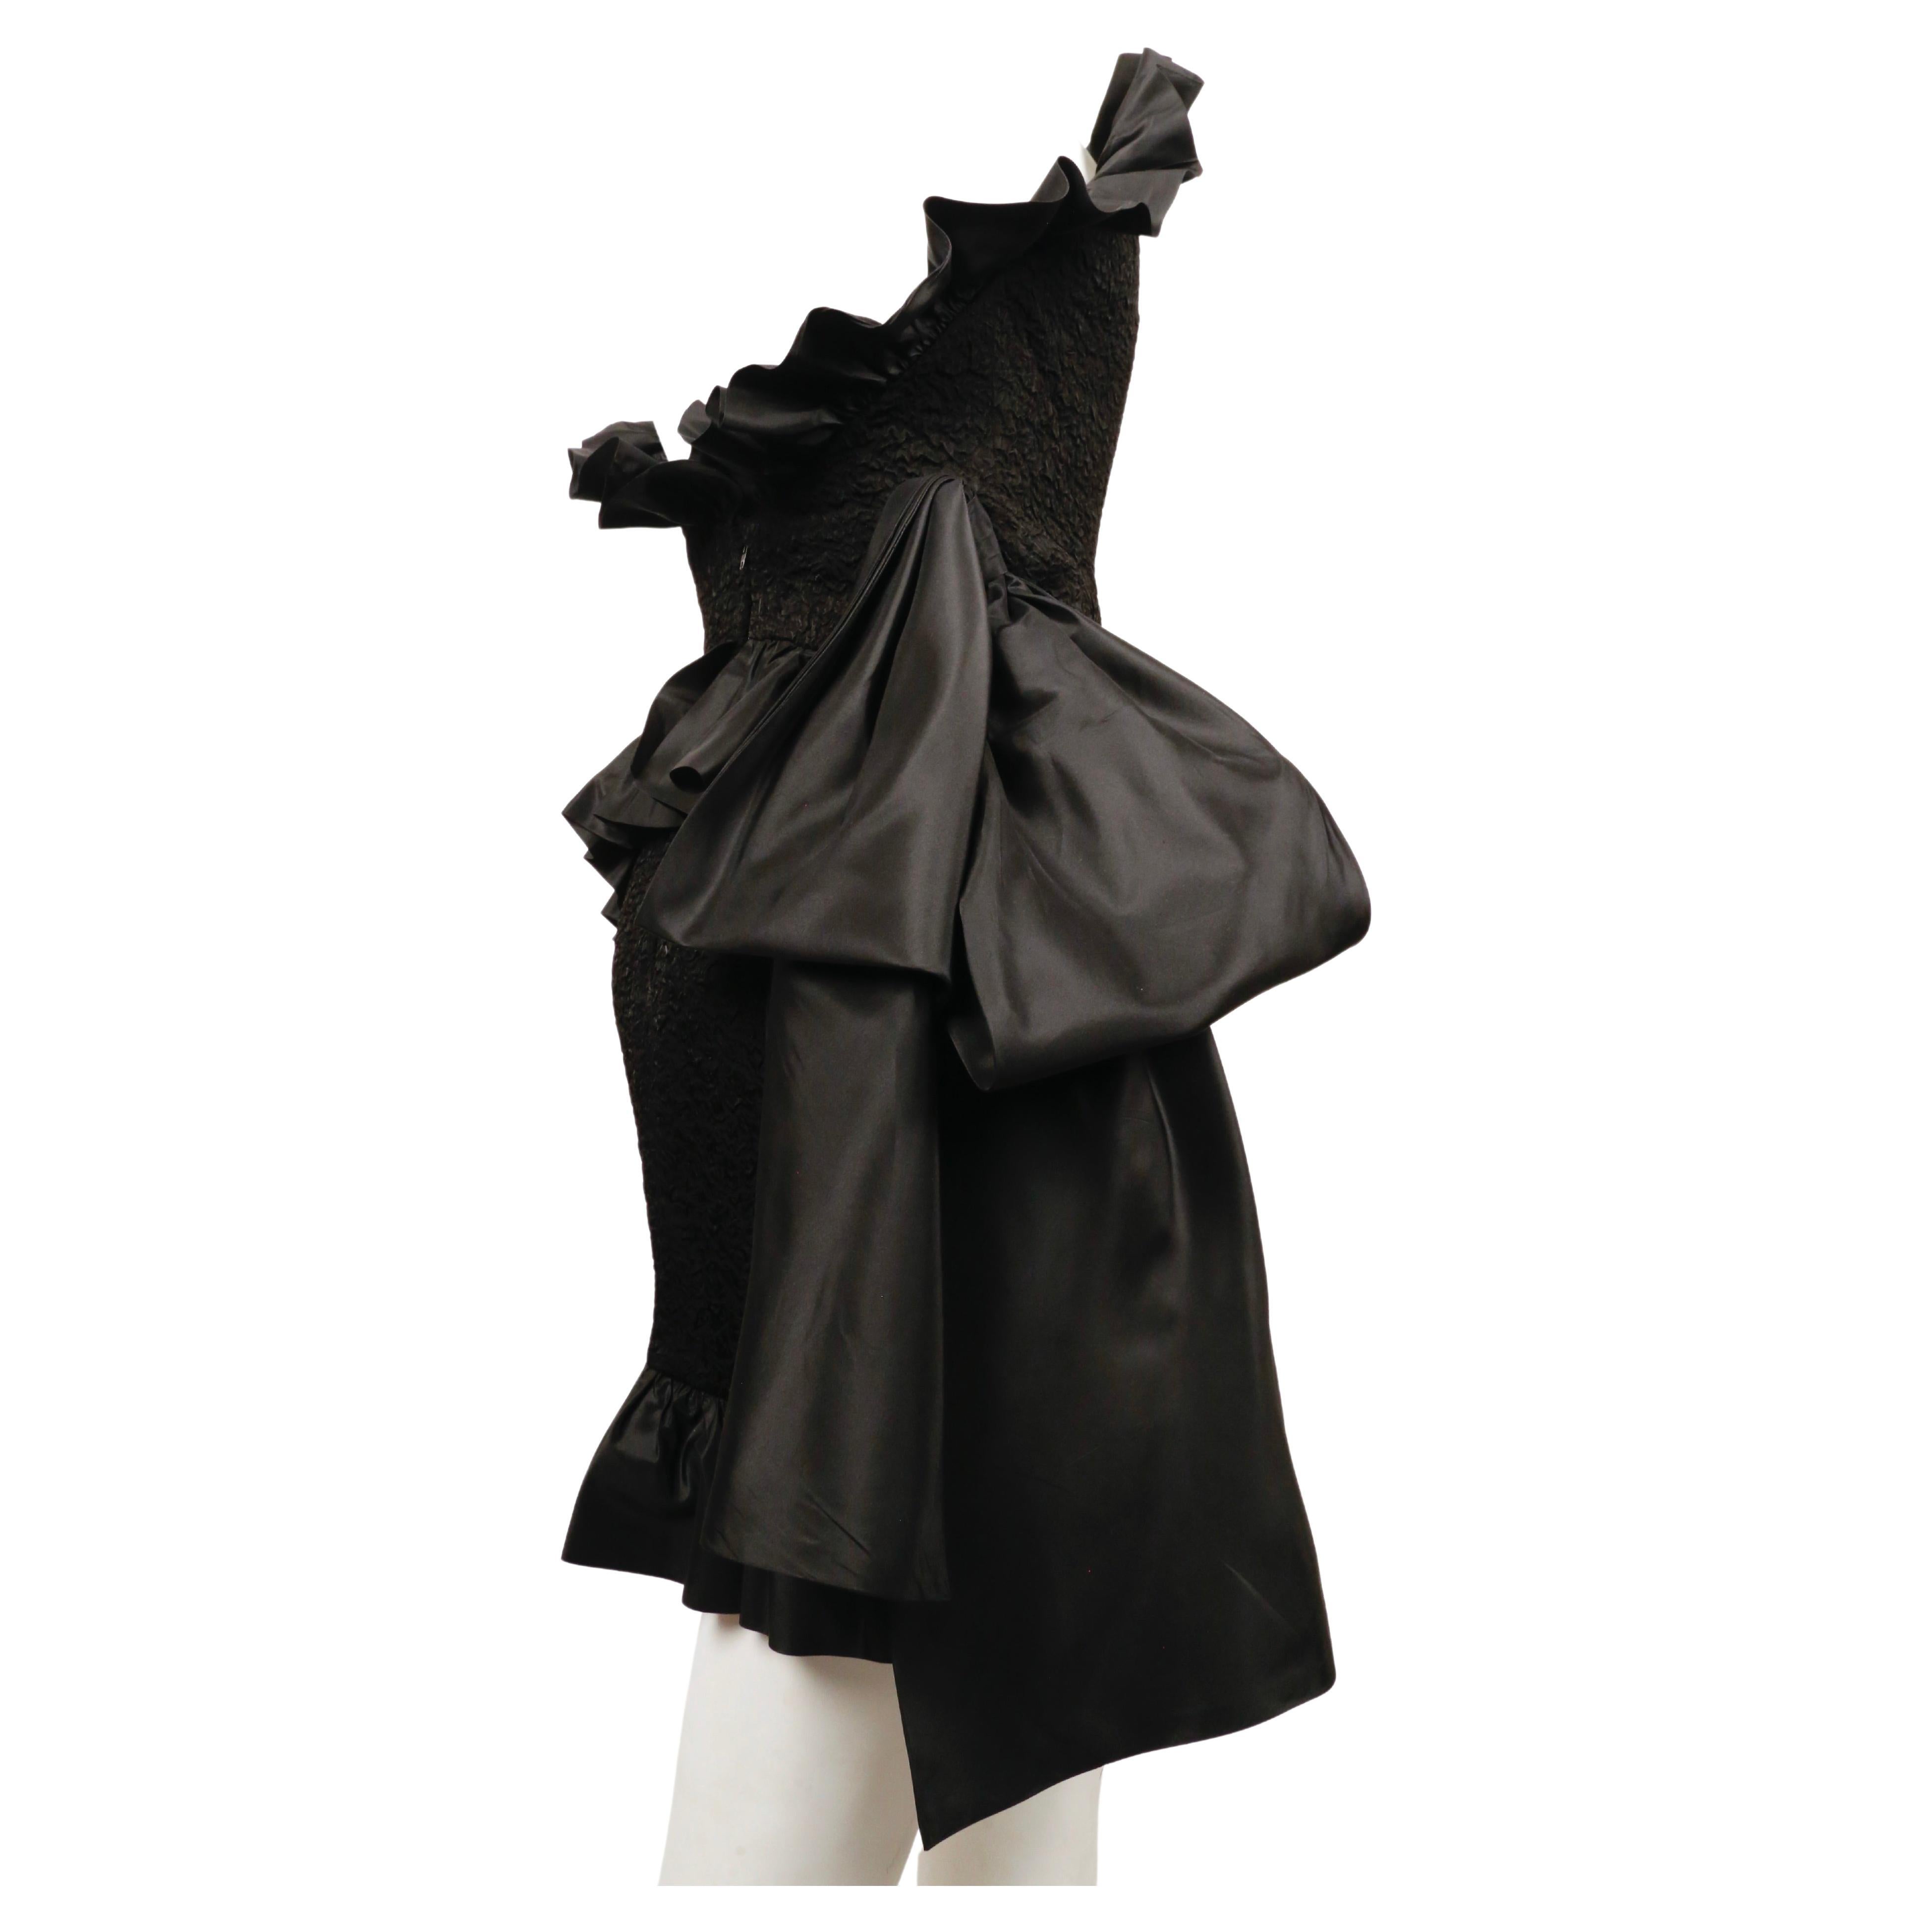 1980's YVES SAINT LAURENT black strapless dress with ruffles and bow In Good Condition For Sale In San Fransisco, CA